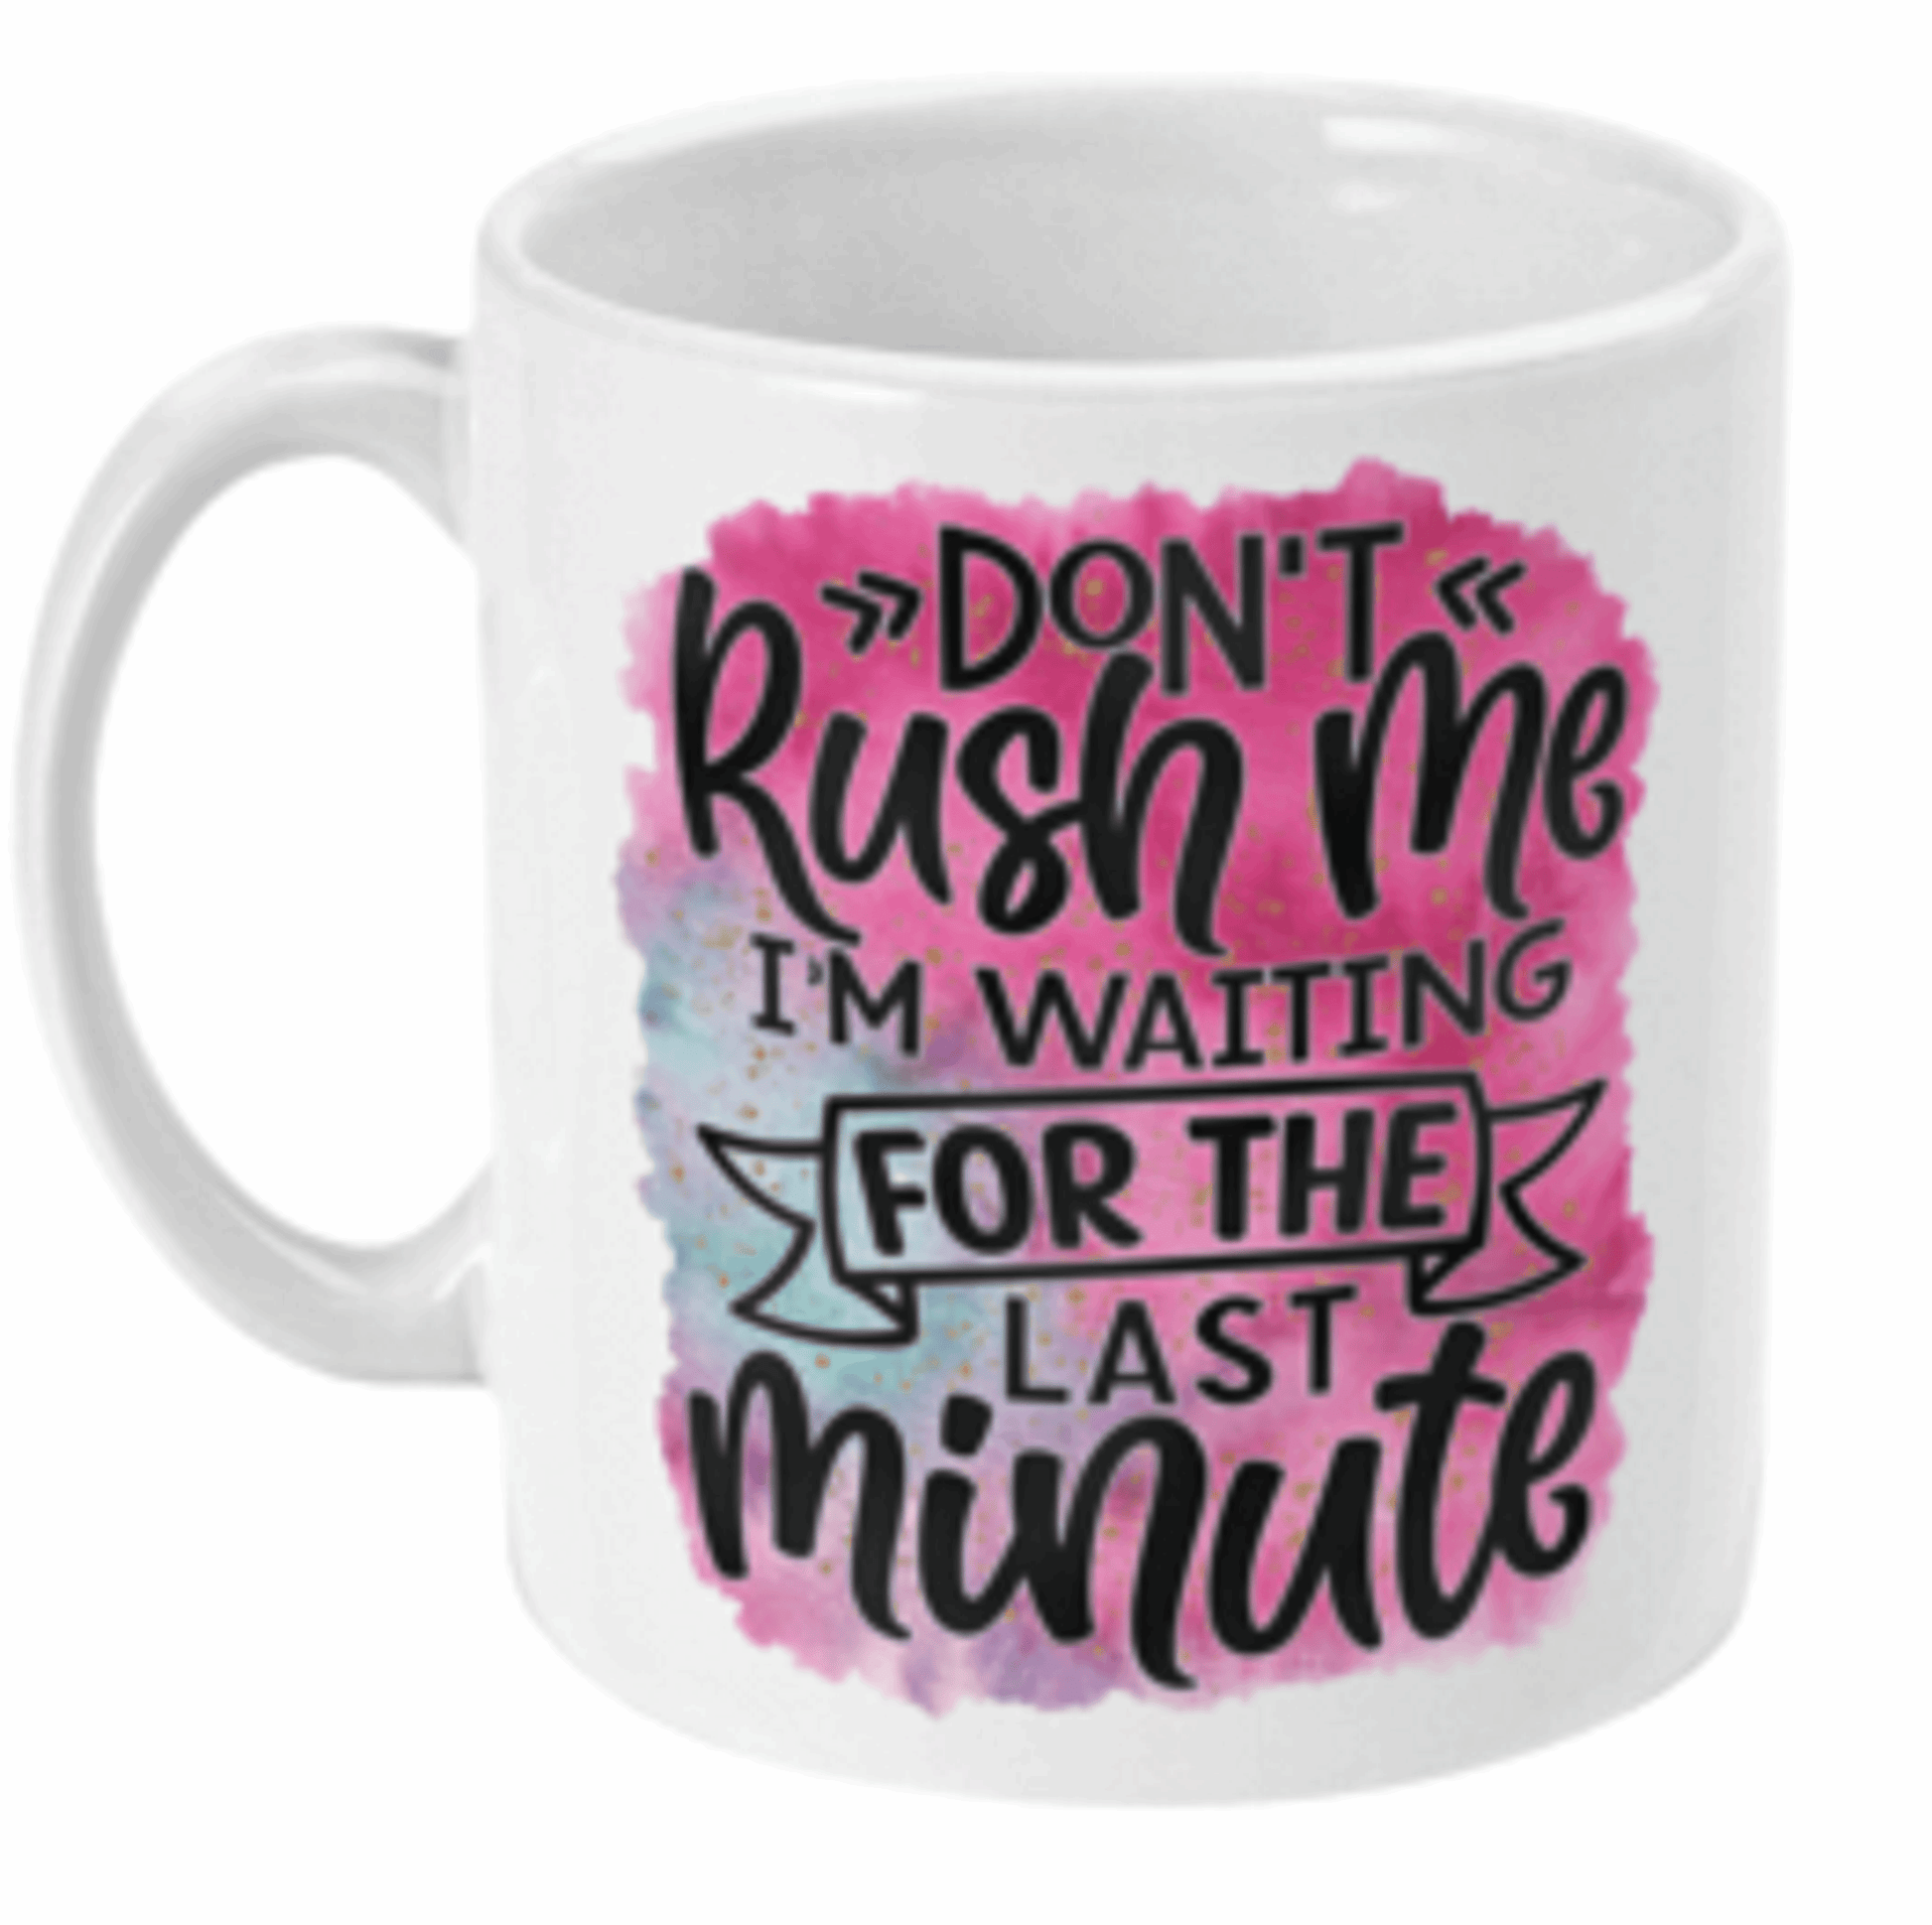  Don't Rush Me I'm Waiting for the Last Minute Mug by Free Spirit Accessories sold by Free Spirit Accessories